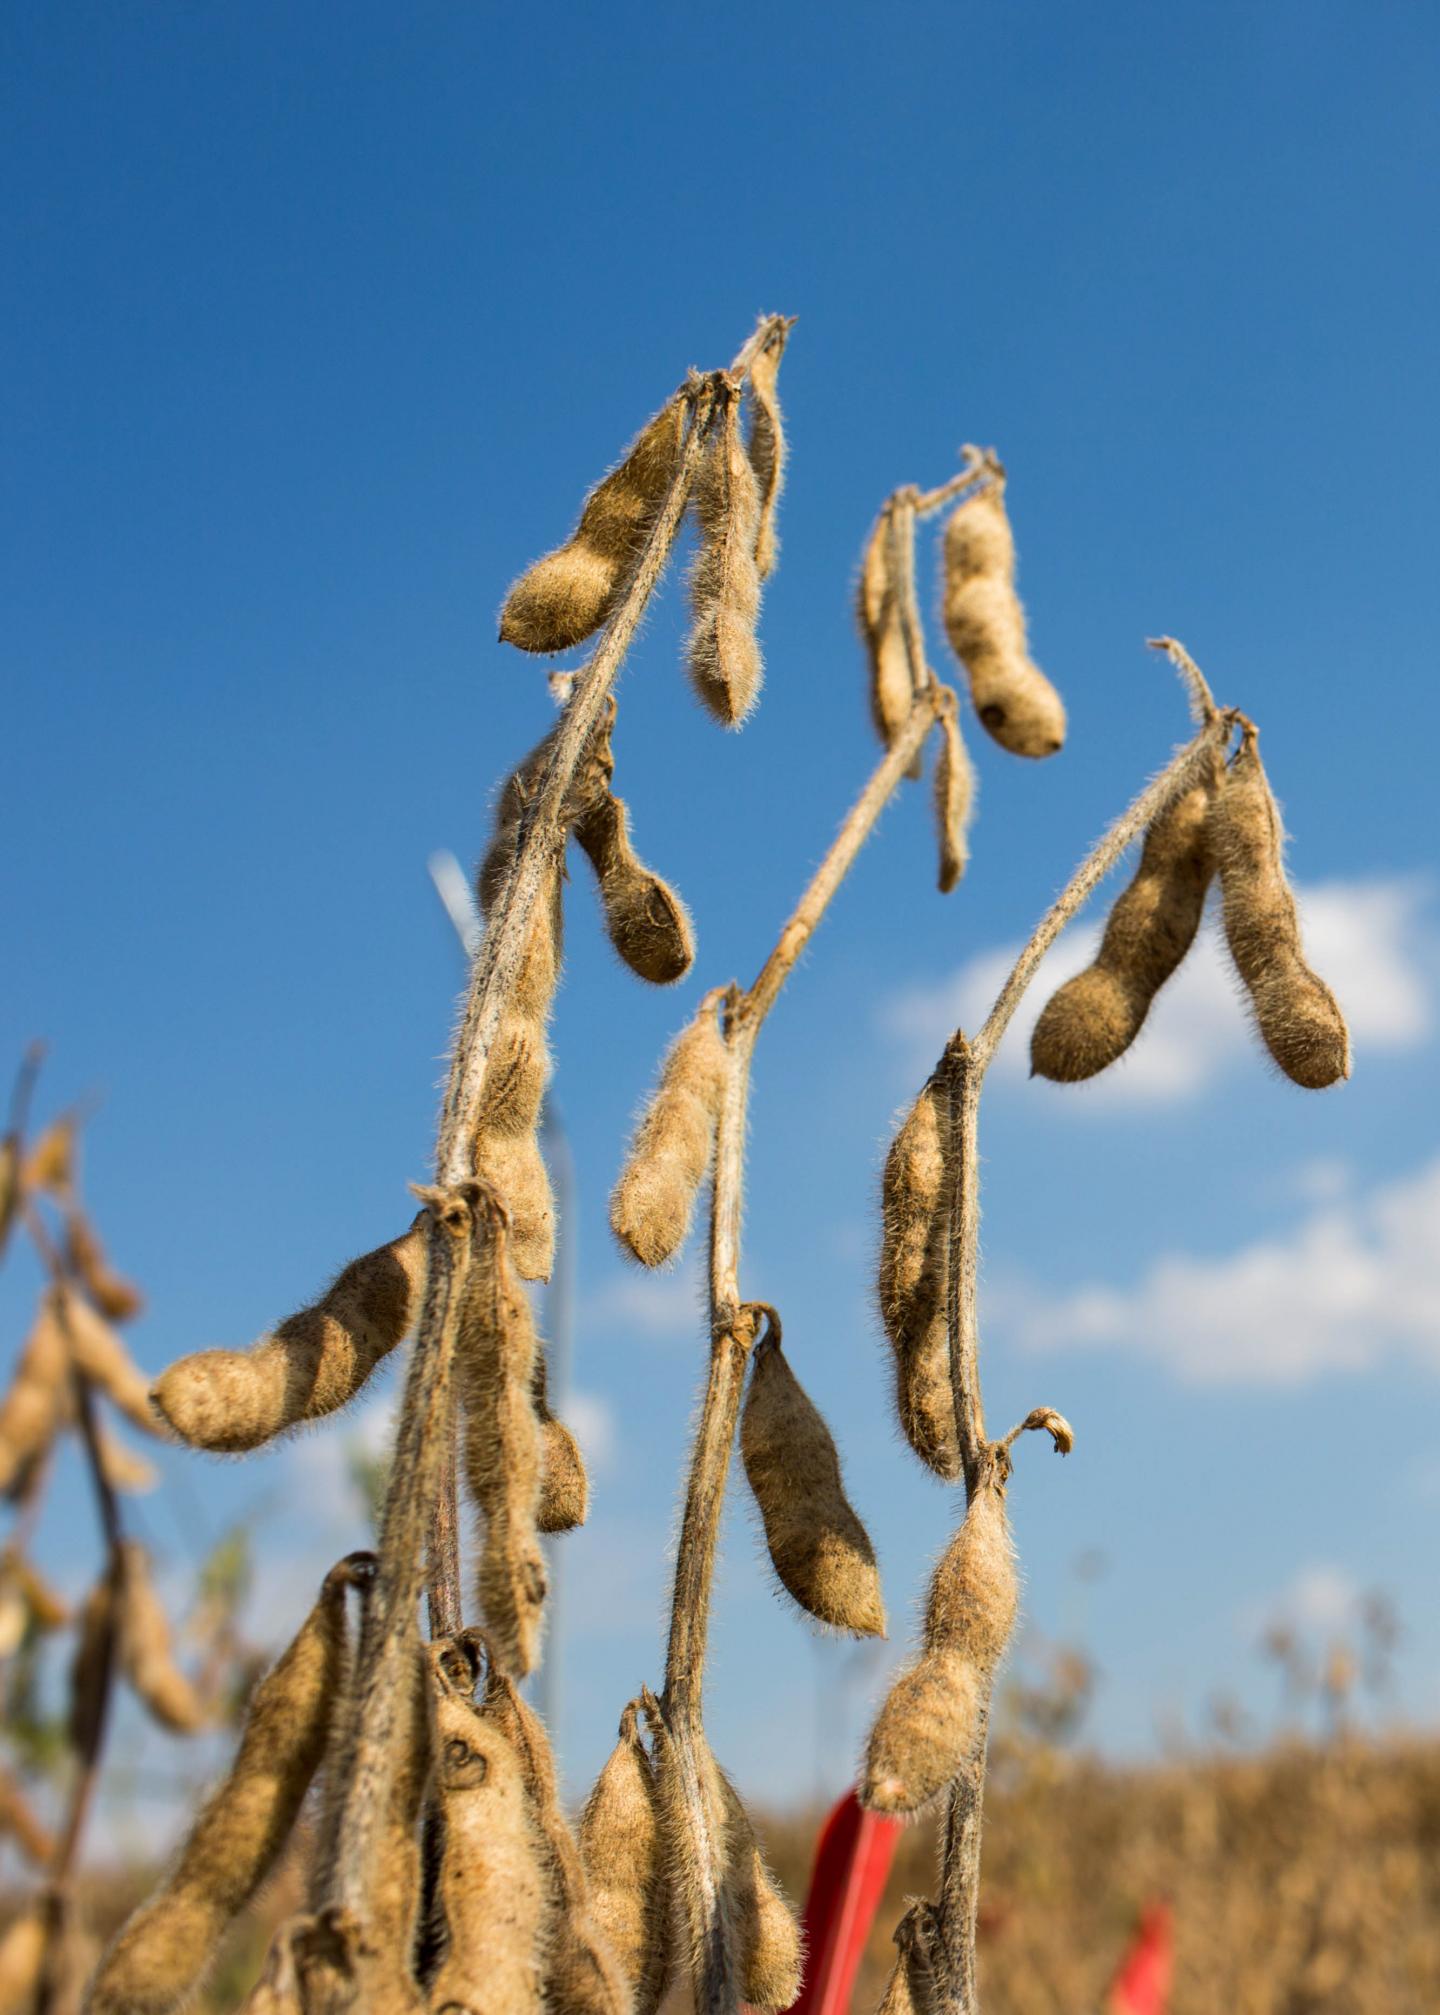 Mature Soybeans